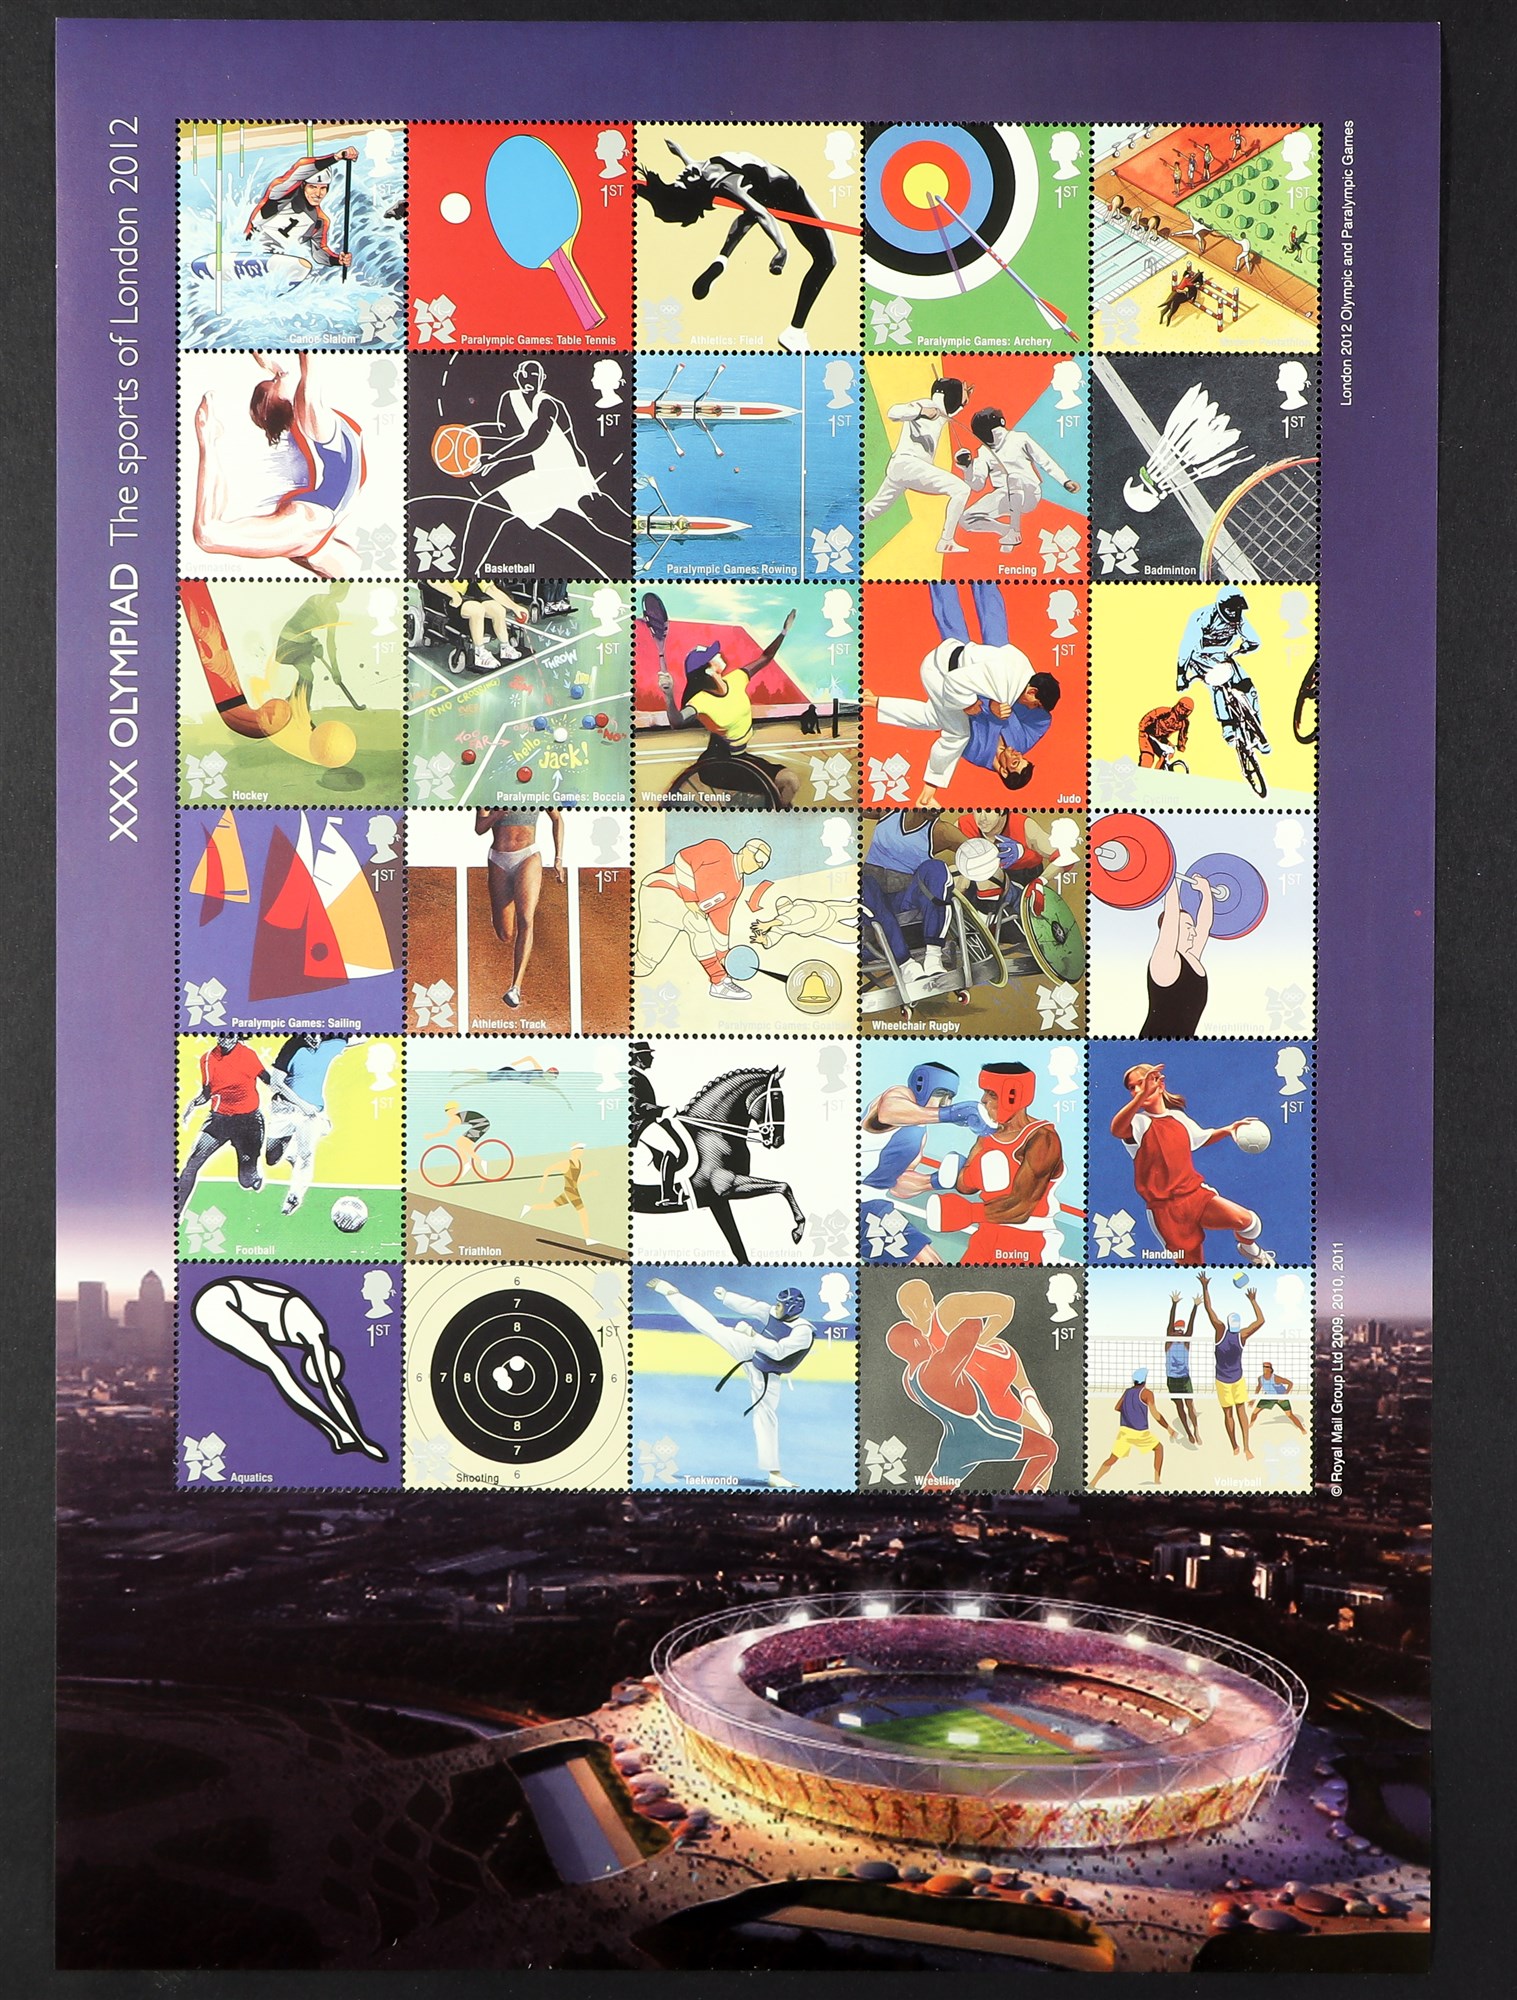 GB.ELIZABETH II MINIATURE SHEETS - UK A-Z, OLYMPICS AND ALBUM COVERS. Three of the more difficult to - Image 2 of 3